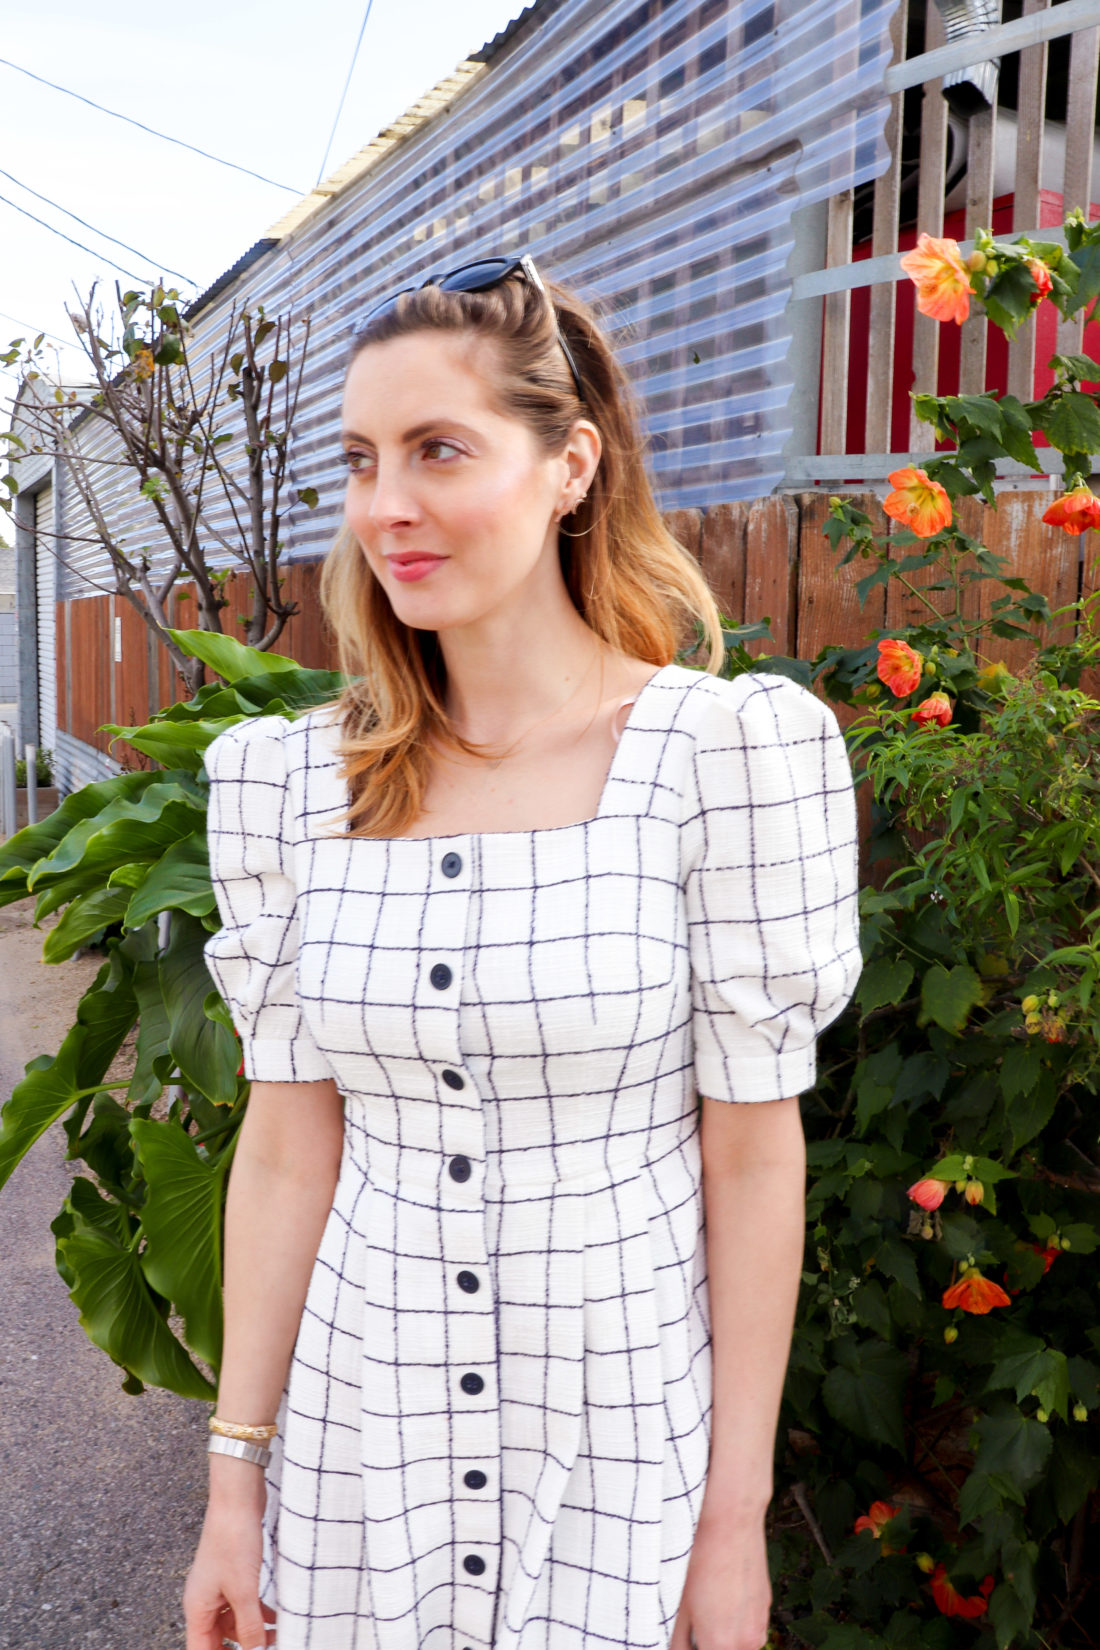 Eva Amurri Martino shares images from her family trip to Los Angeles